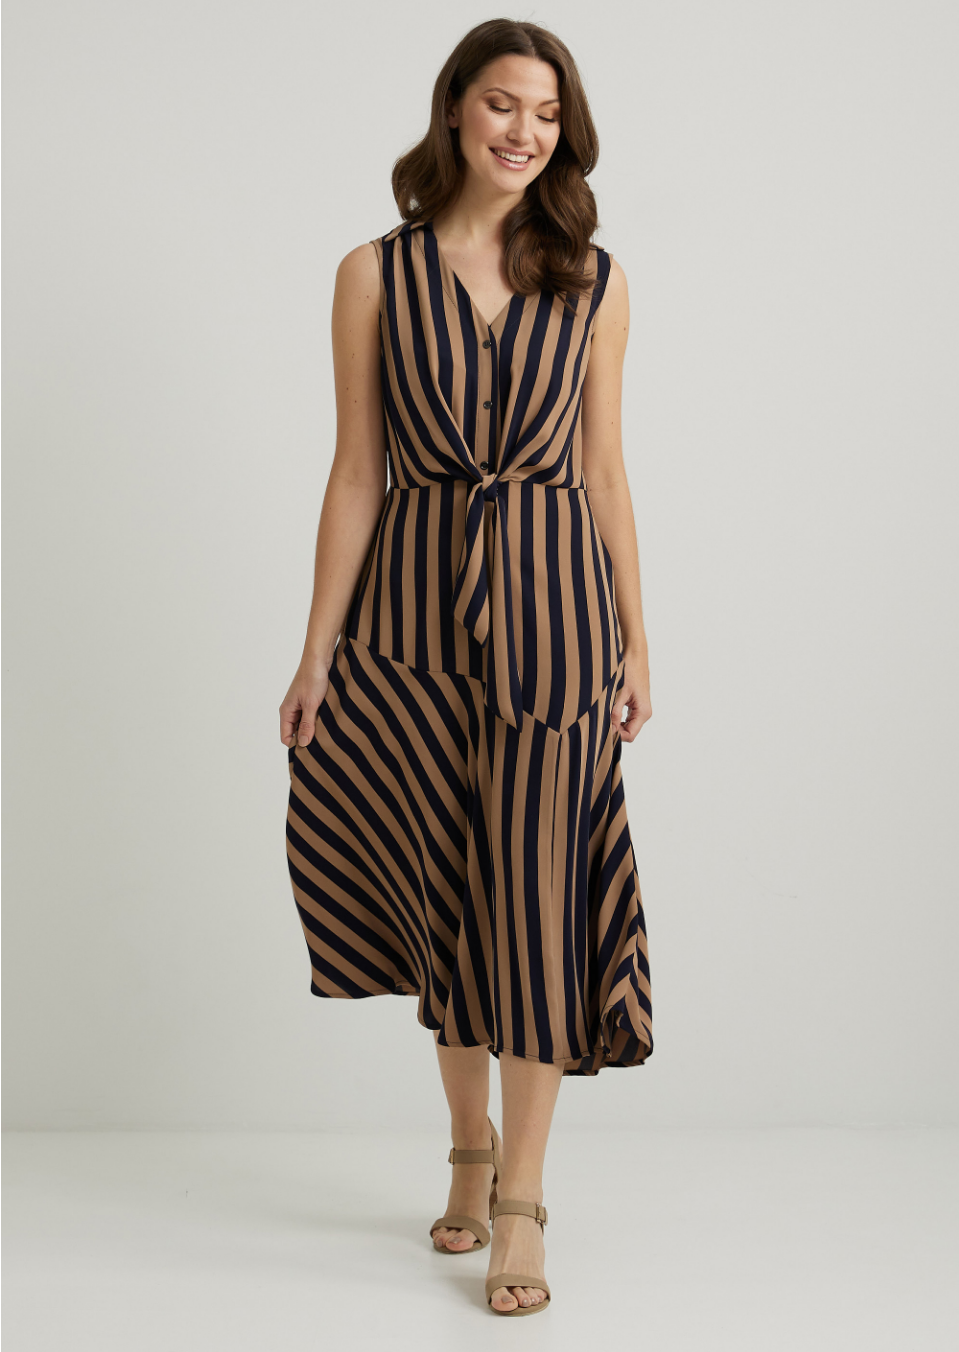 STRIPED FIT & FLARE DRESS STYLE 222207